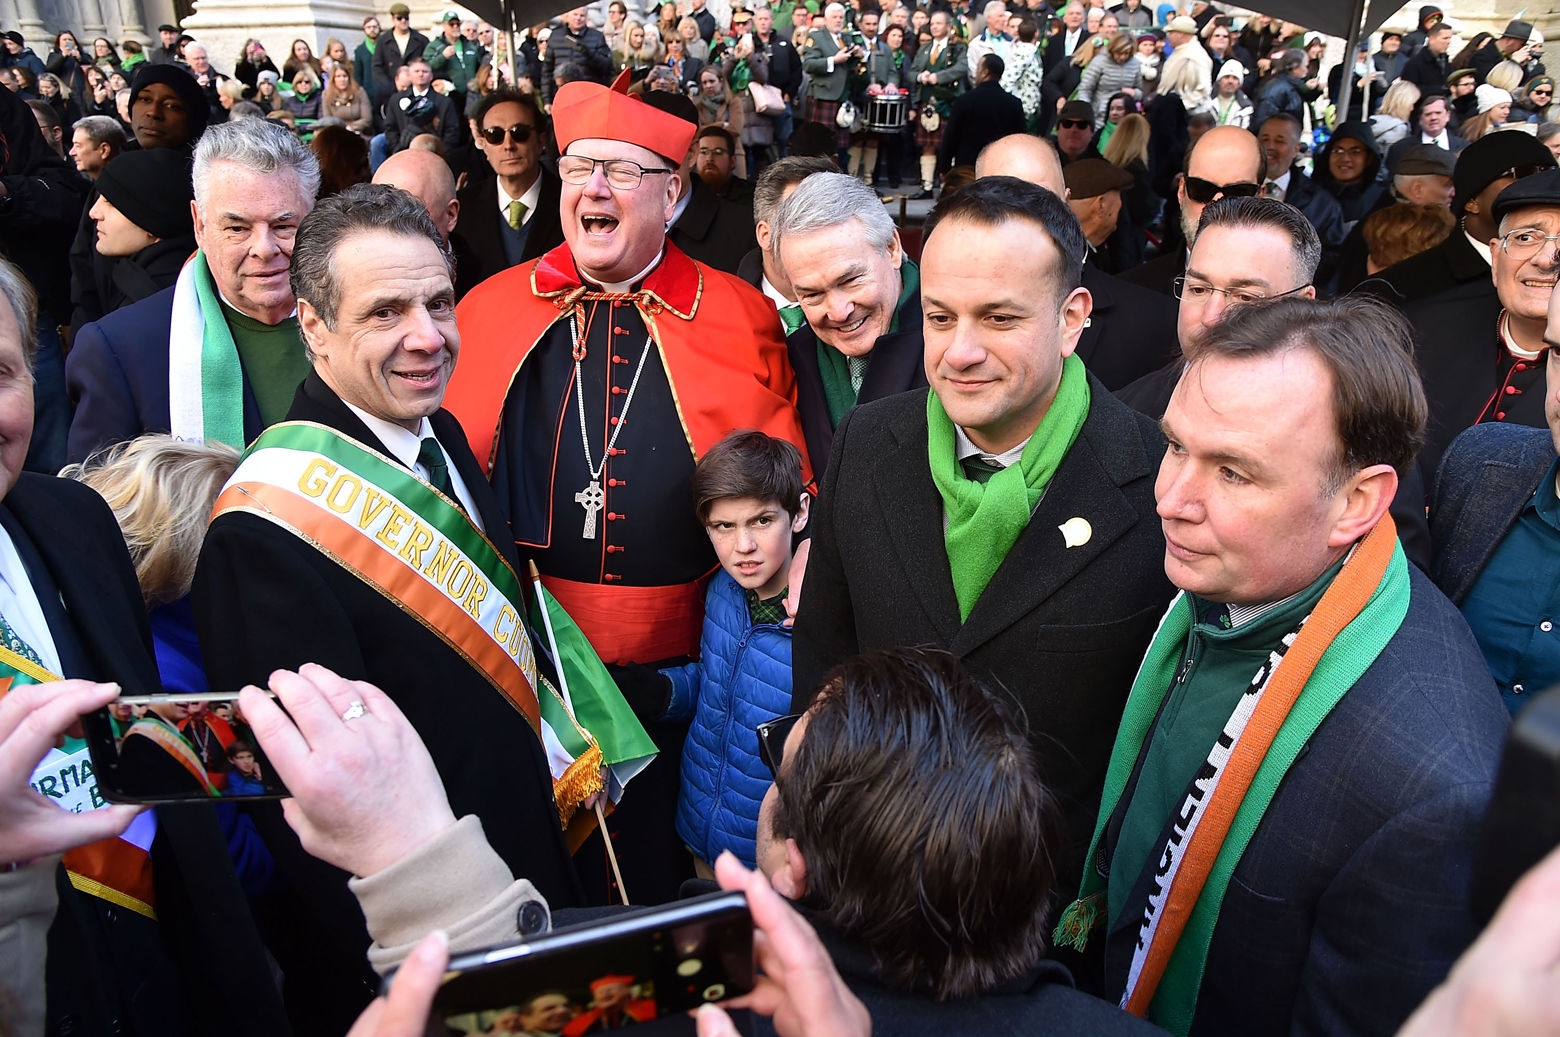 New York Governor Andrew Cuomo, Cardinal Timothy Dolan and Prime Minister of Ireland Leo Varadkar attend the 2018 New York City St. Patrick's Day Parade on March 17, 2018 in New York City.  (Theo Wargo/Getty Images)